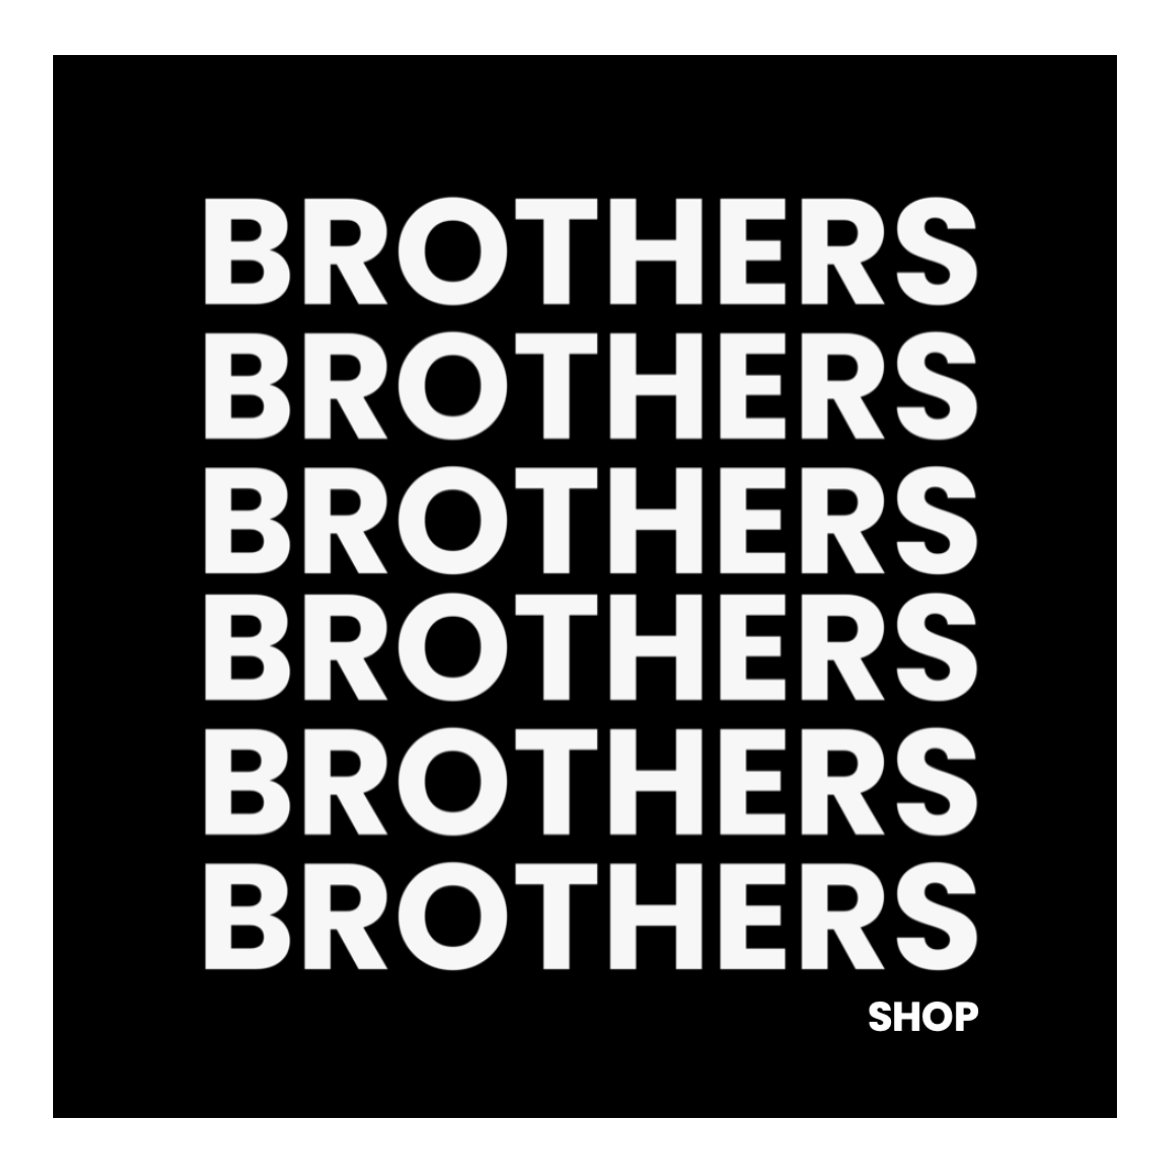 the brothers shop logo_ brothers organization_male bonding